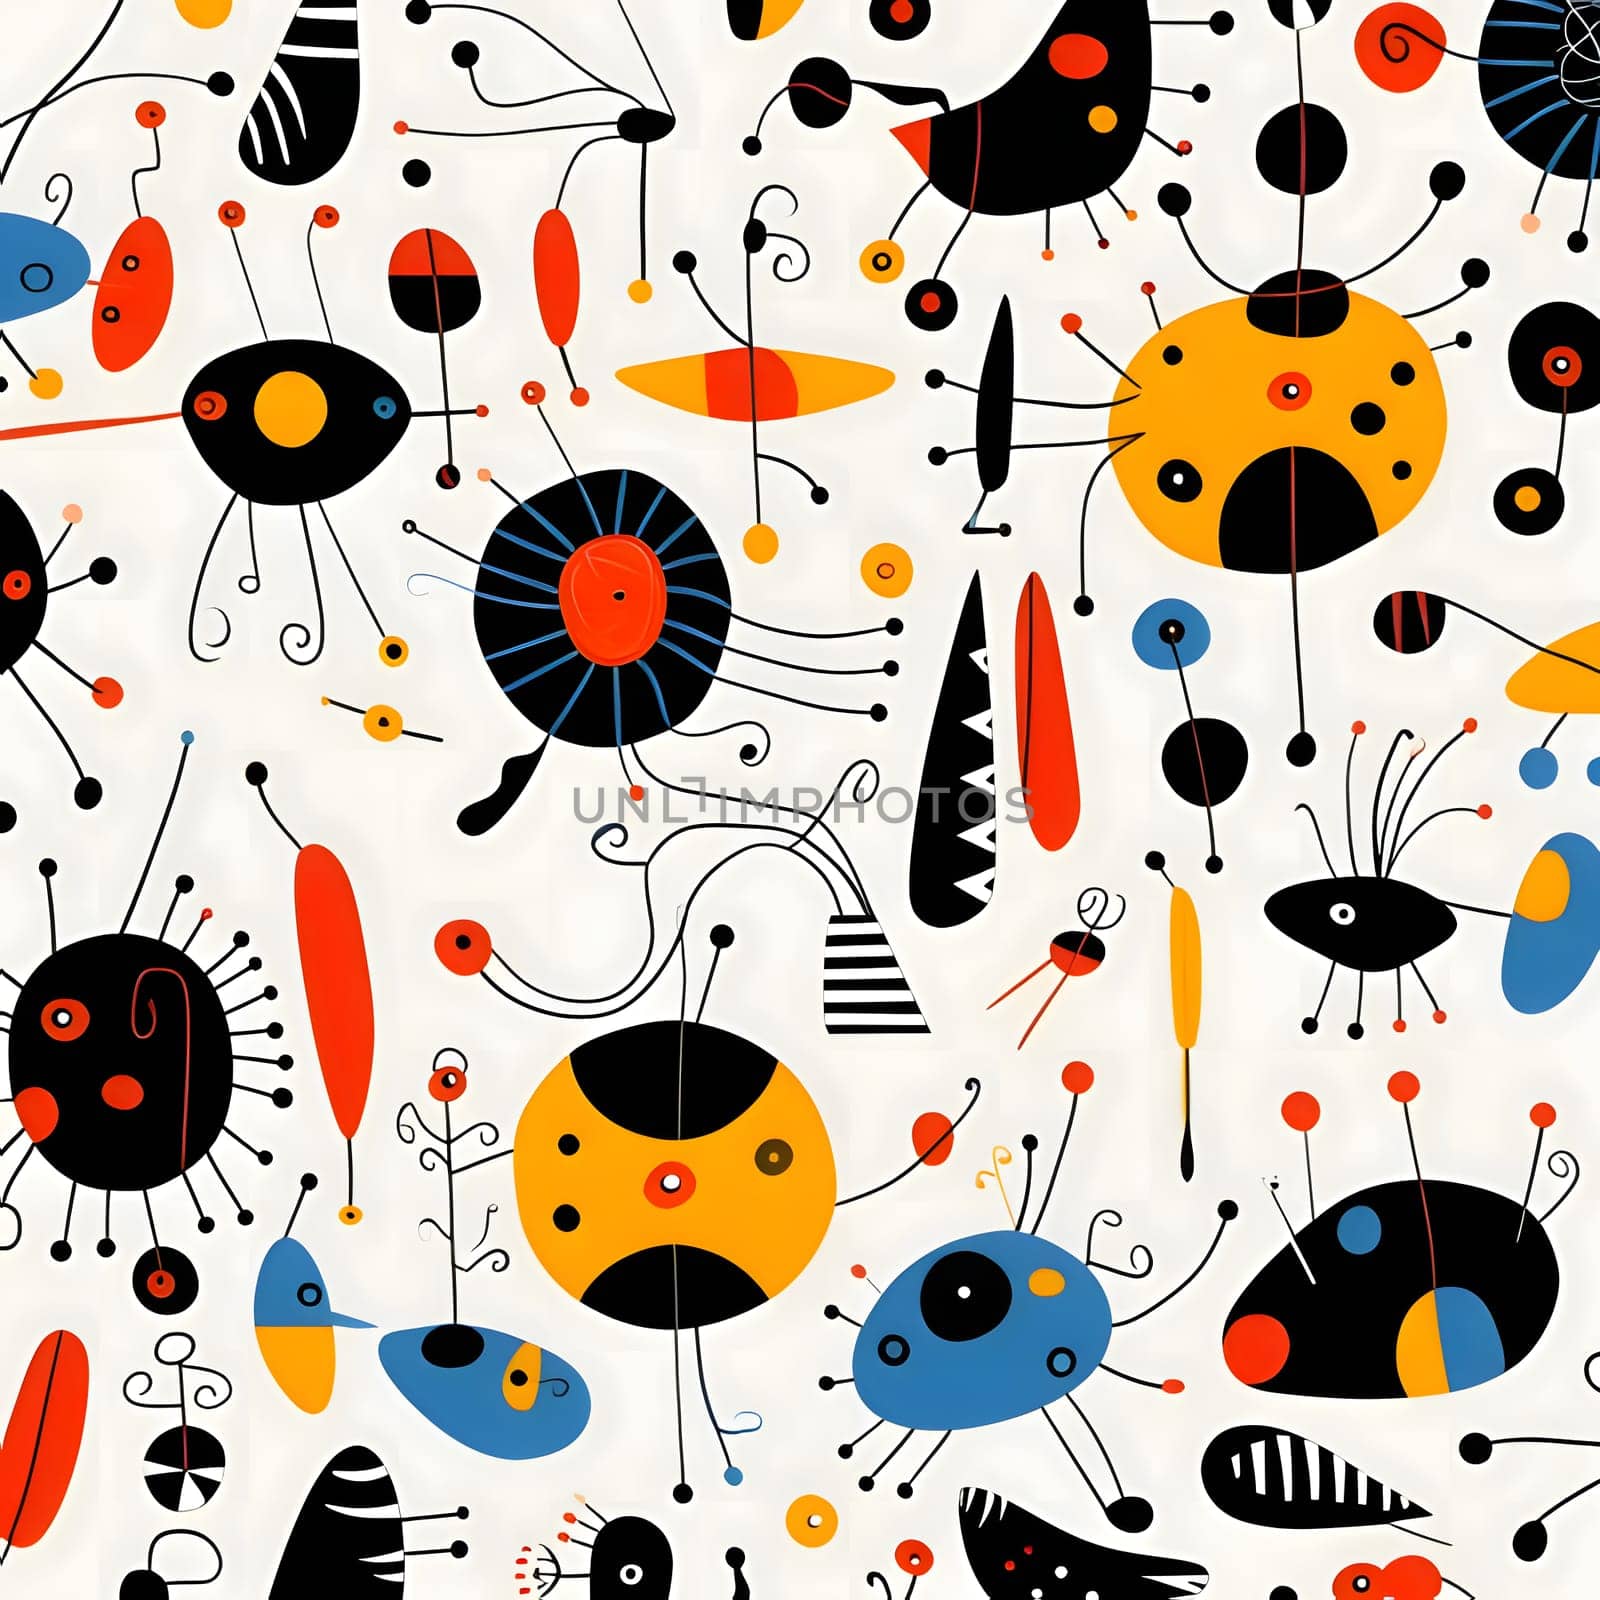 Patterns and banners backgrounds: Seamless pattern with ladybugs and insects. Vector illustration.